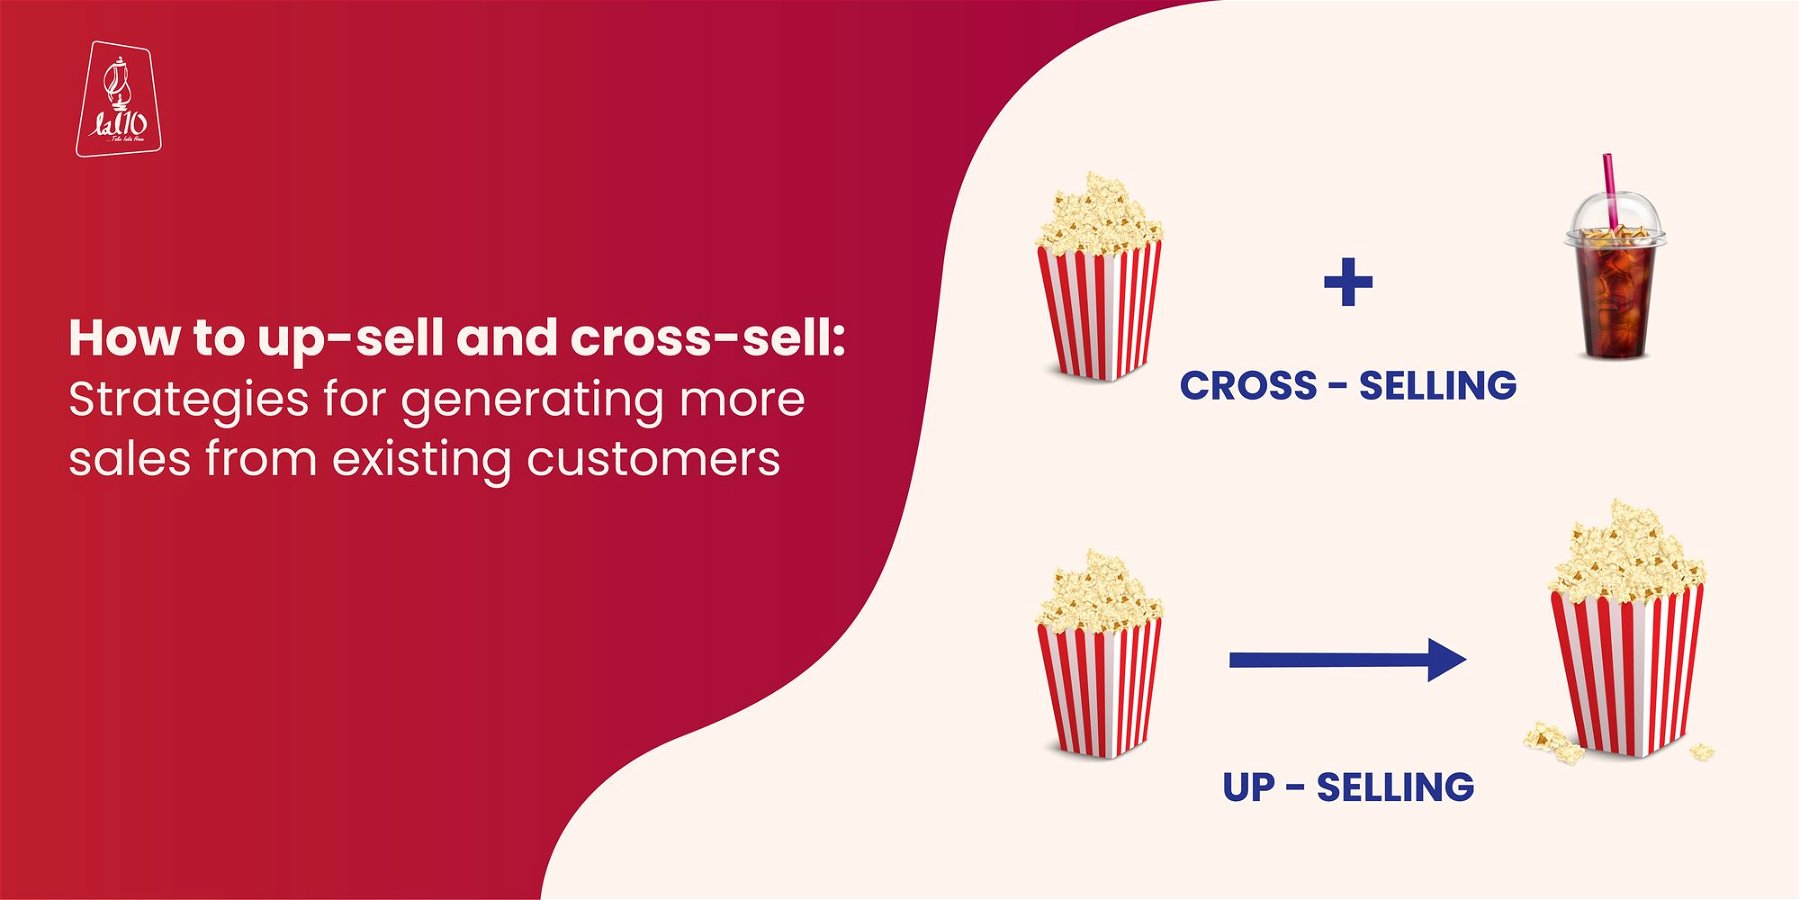 How to up-sell and cross-sell: Strategies for generating more sales from existing customers